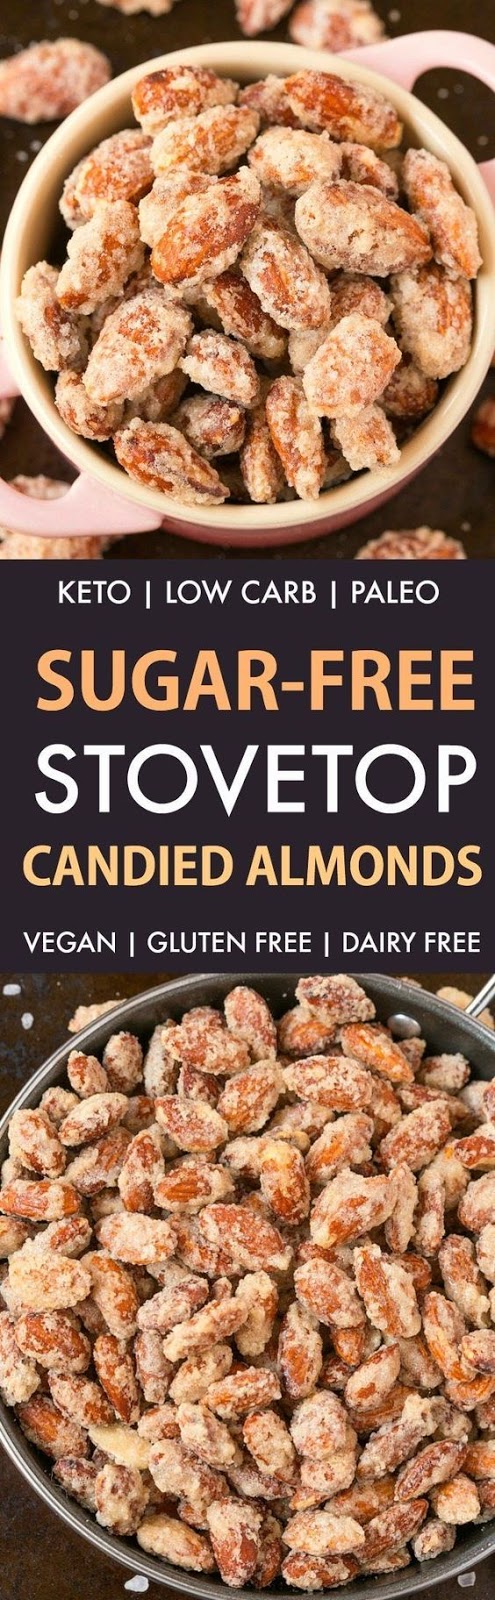 EASY STOVETOP SUGAR FREE CANDIED ALMONDS